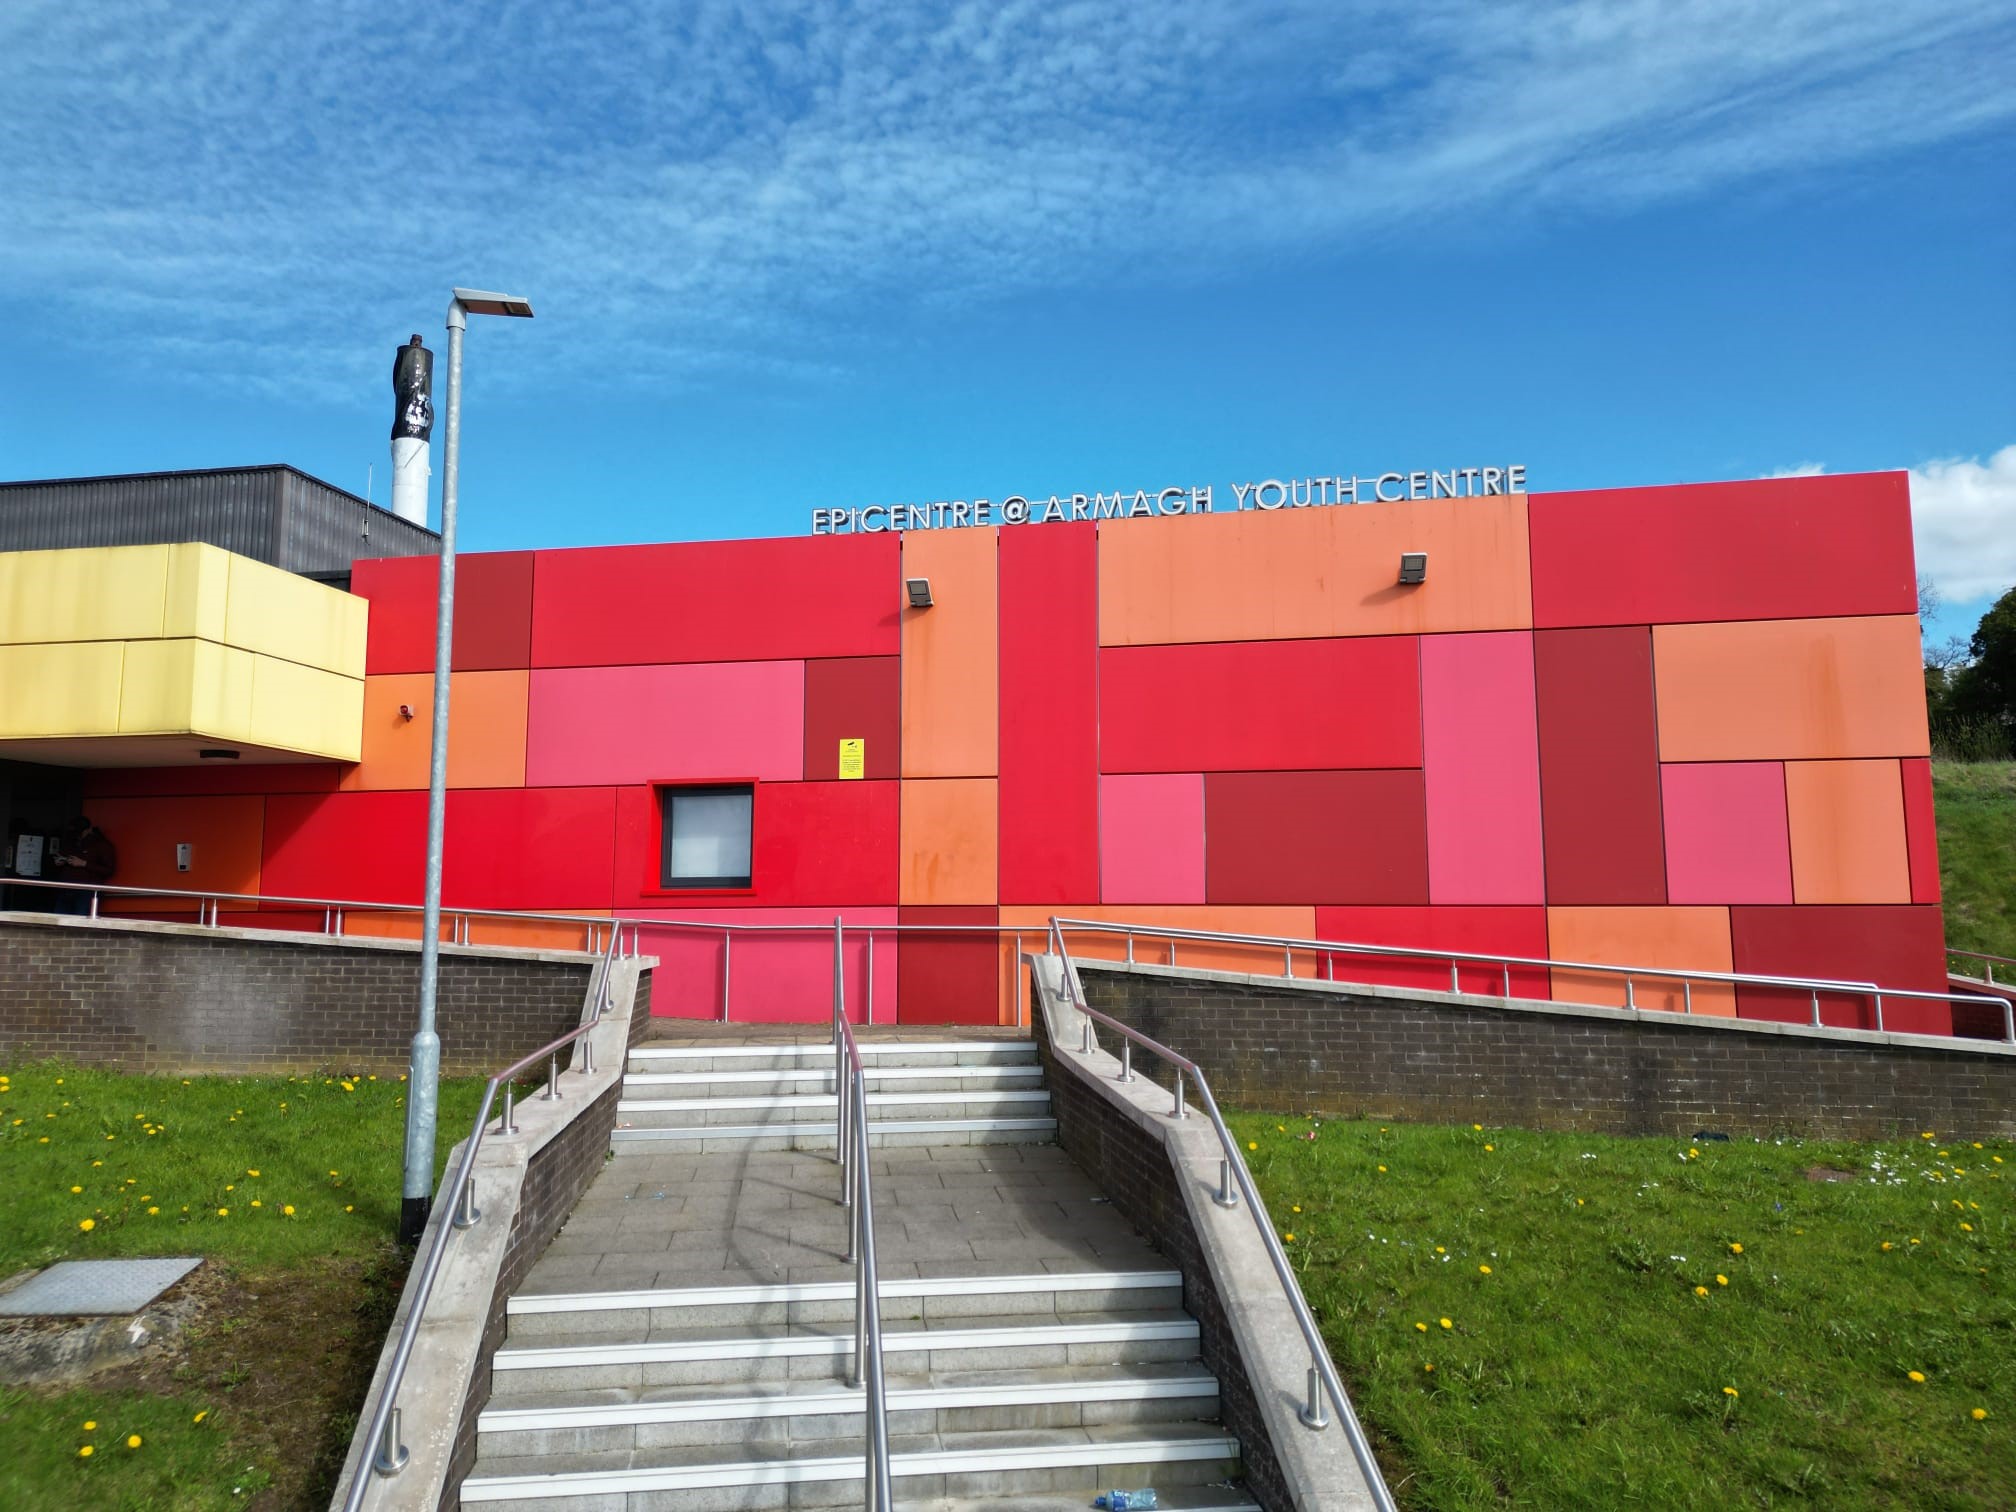 Front of epicentre. There are steps leading up to a large building which has red, pink, orange and yellow panels covering the whole building.